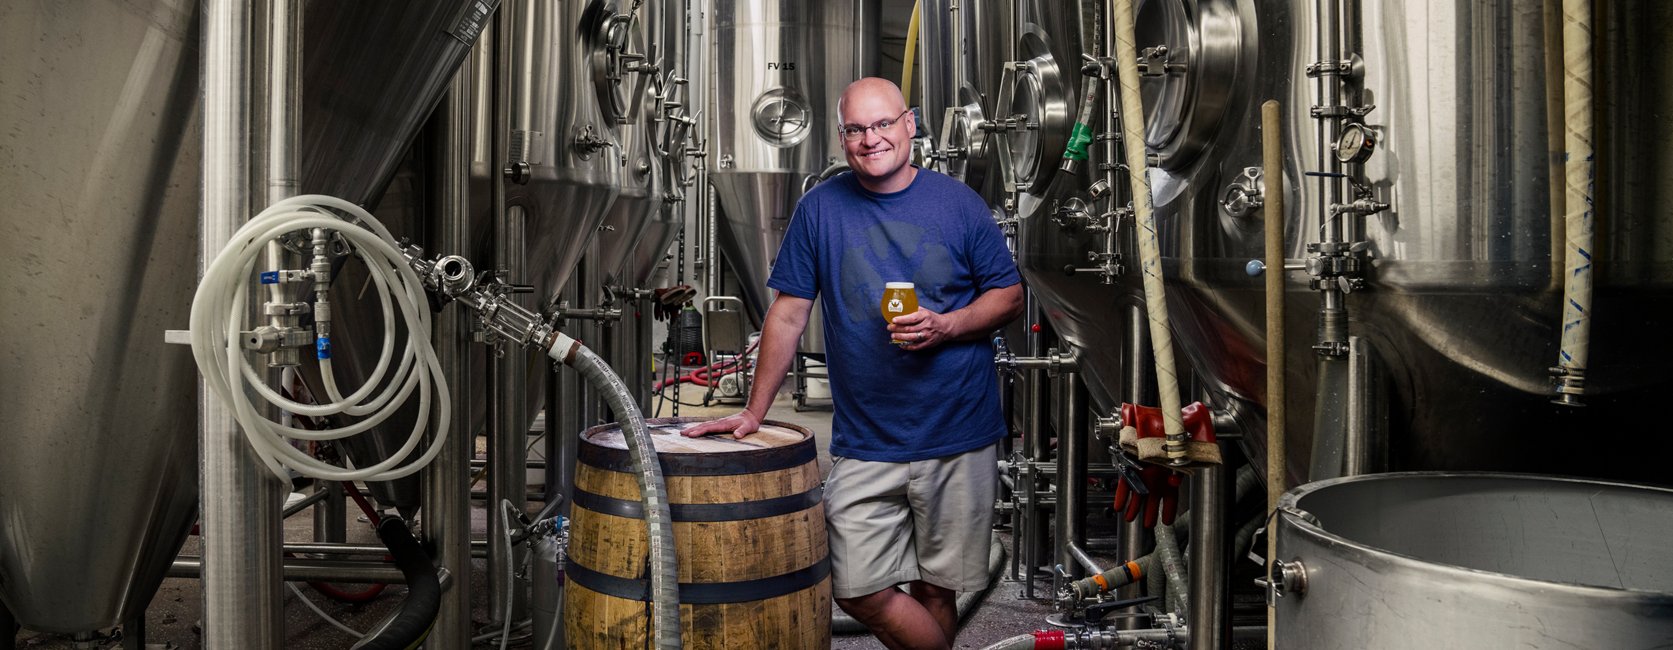 Charlie Bredo - owner and operator of Troubled Monk Brewery